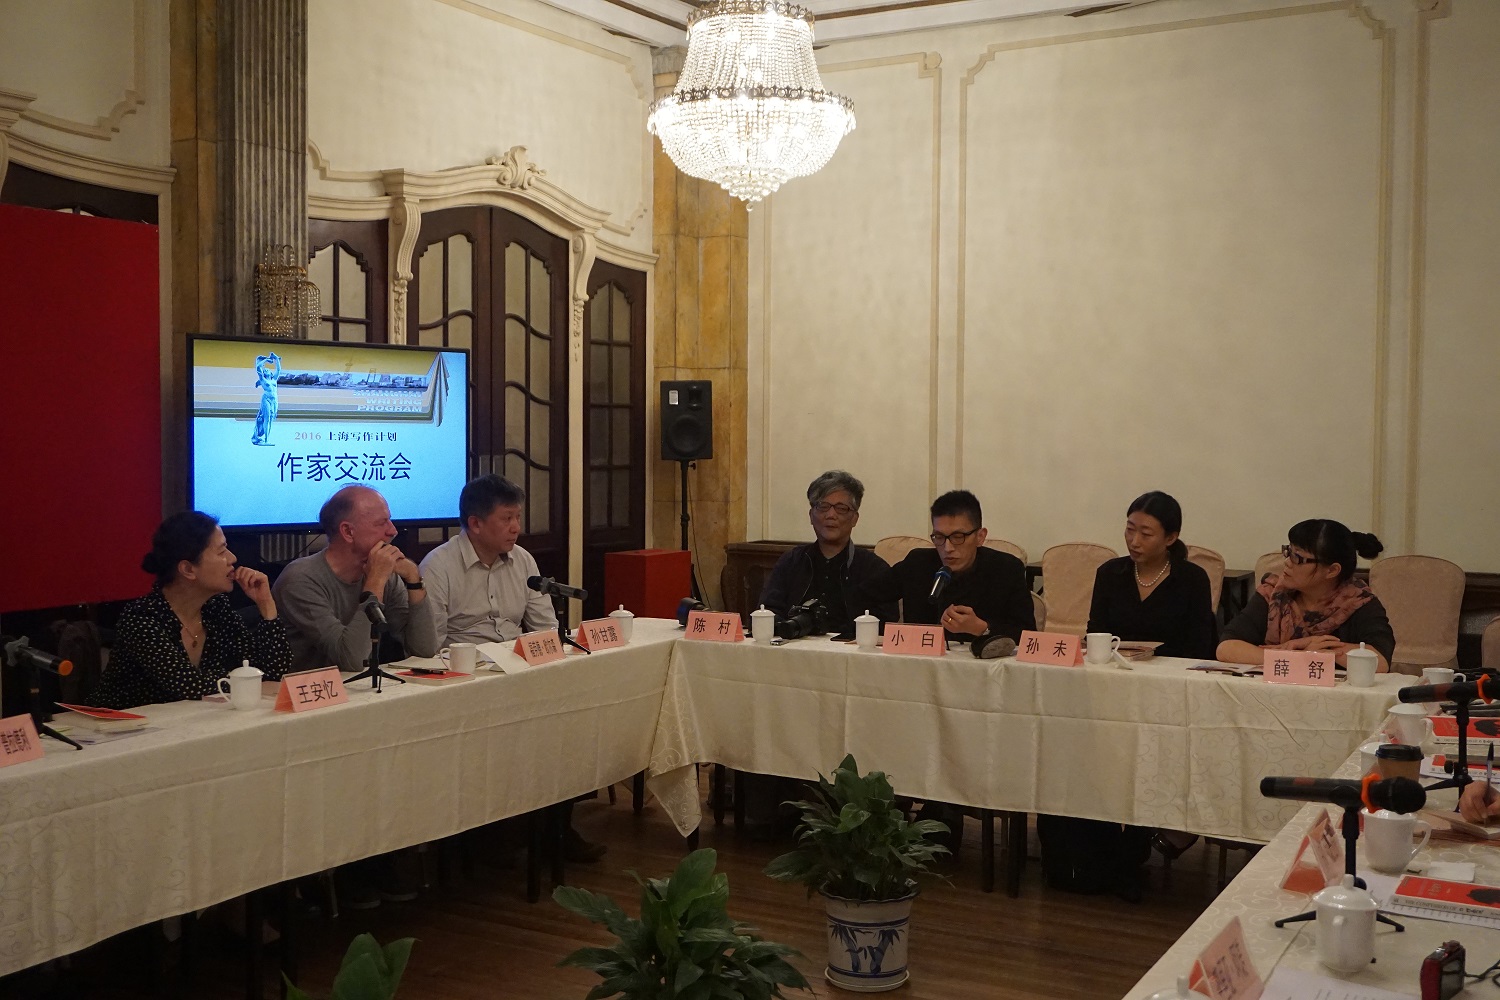 Chinese writers at Shanghai Writers' Association